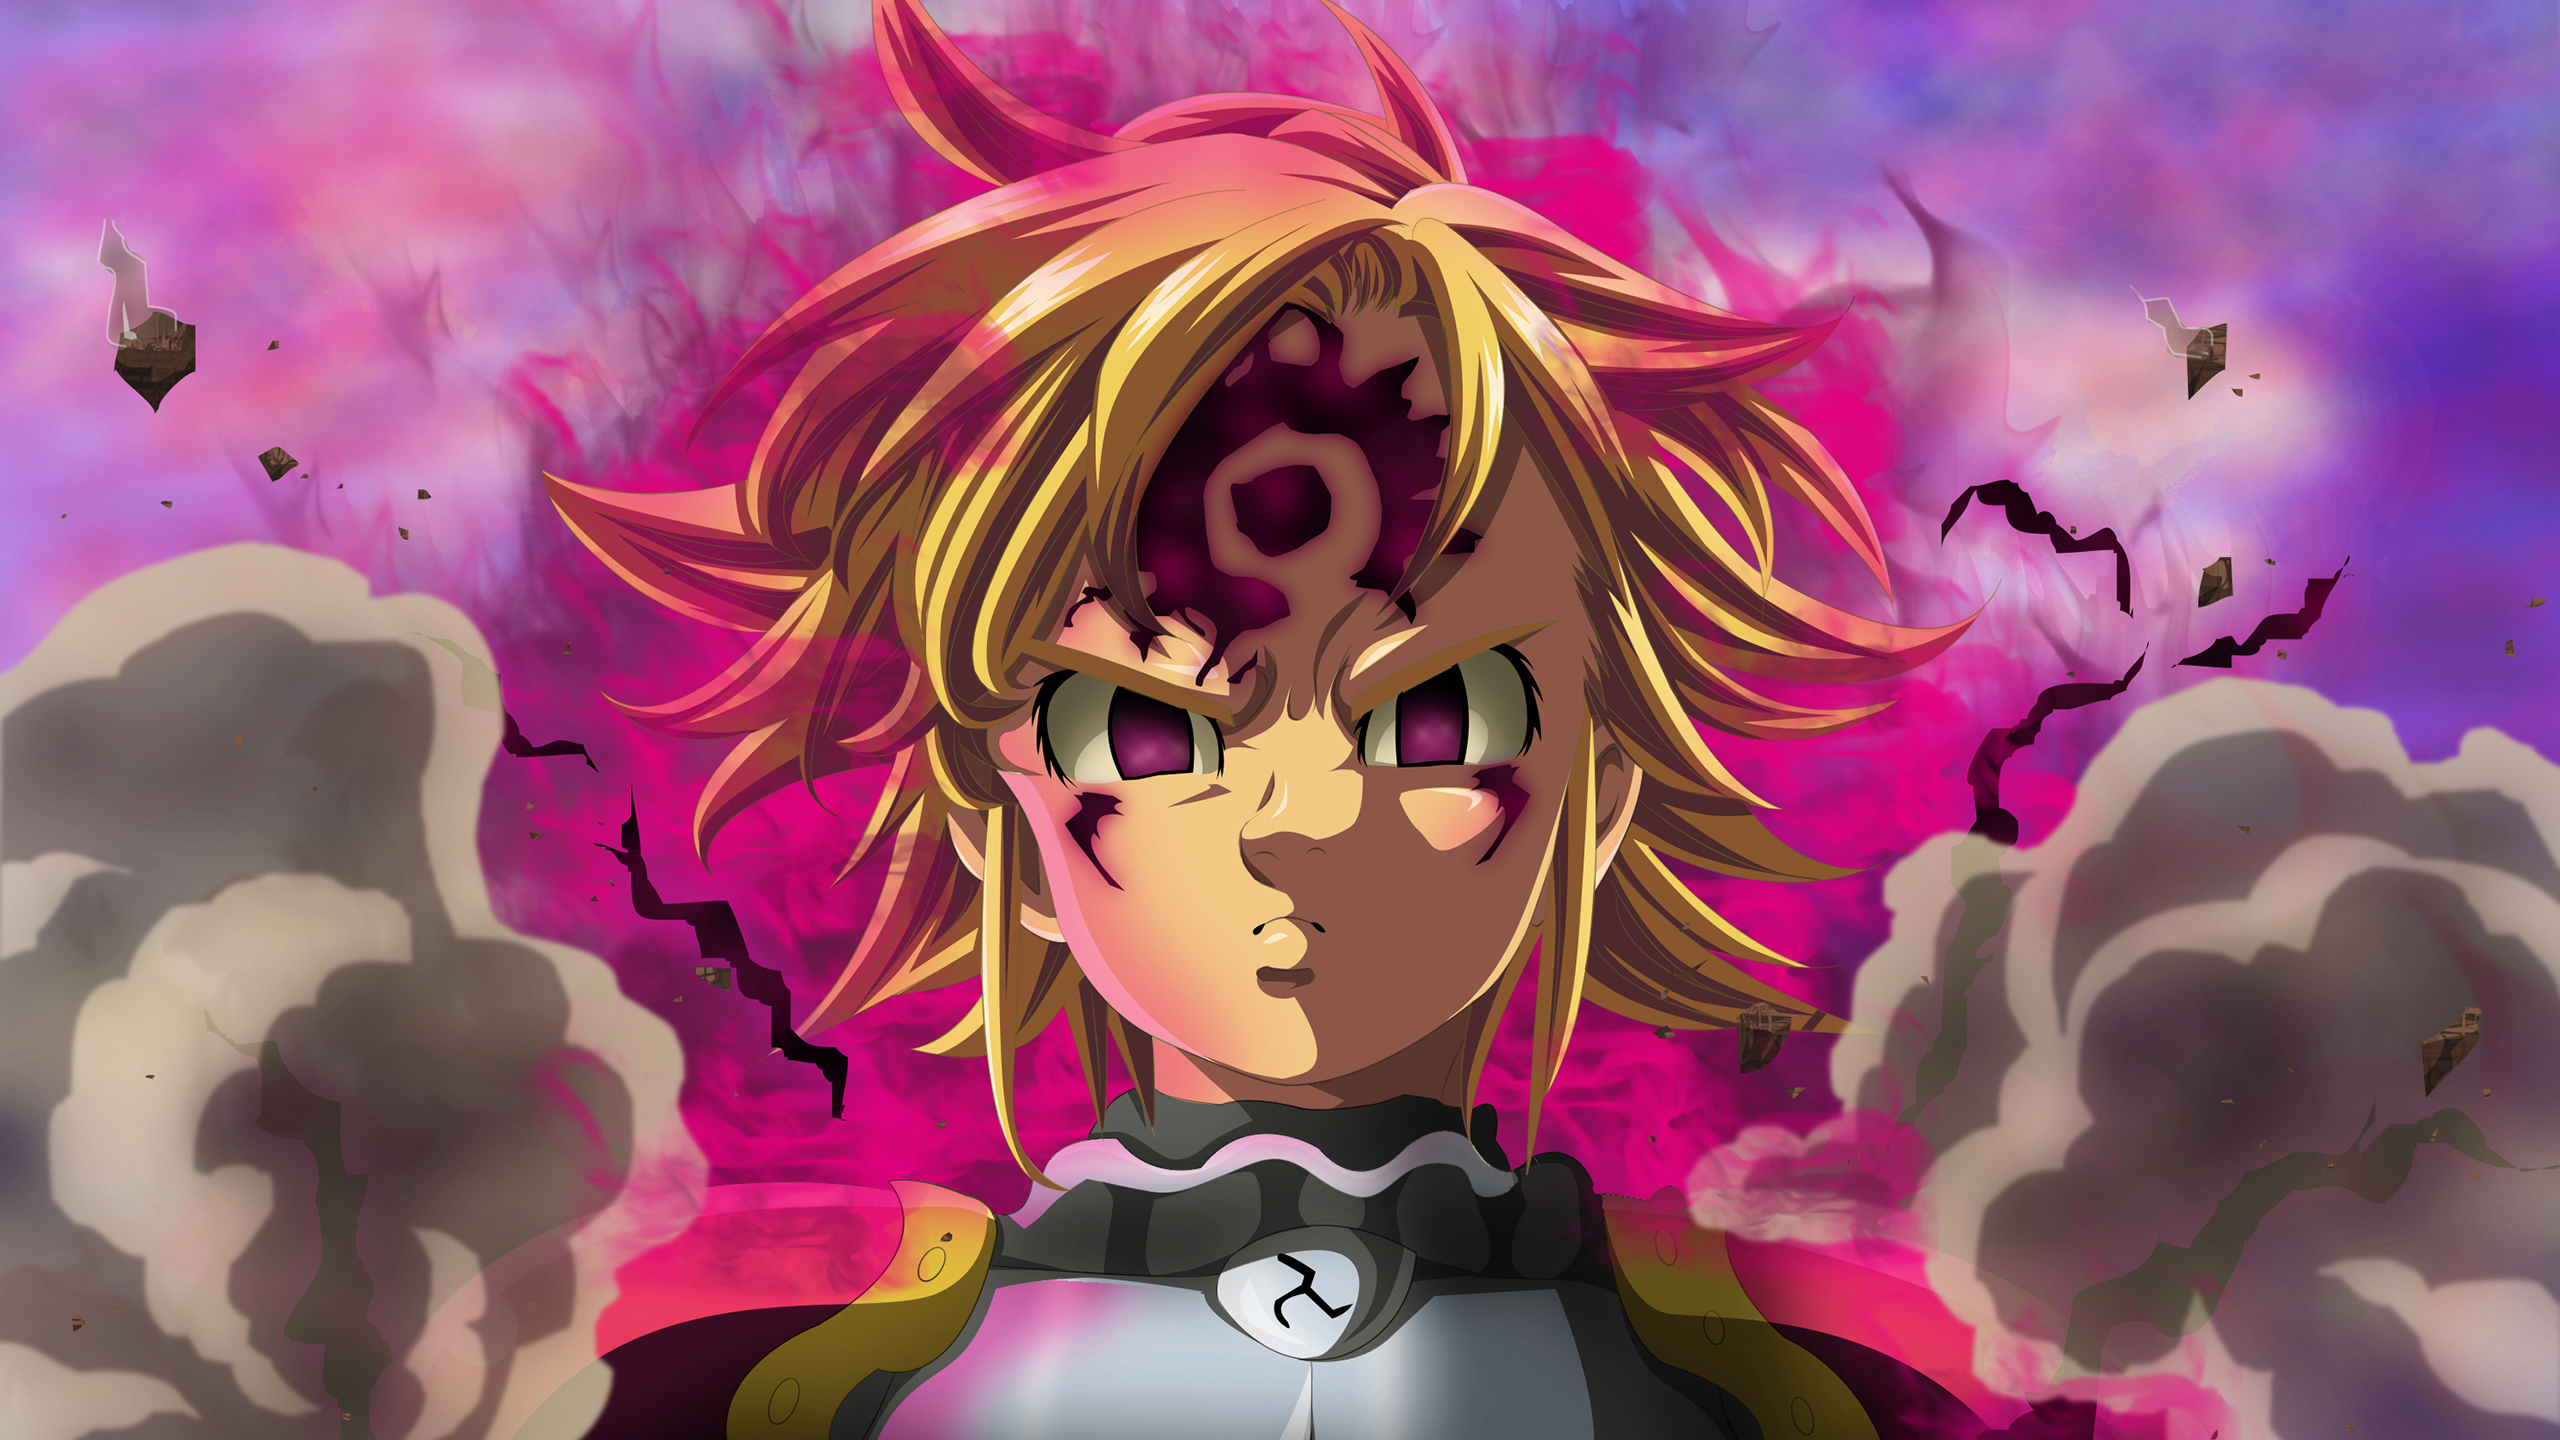 2560x1440 Meliodas The Seven Deadly Sins 1440p Resolution Wallpaper Hd Anime 4k Wallpapers Images Photos And Background Wallpapers Den